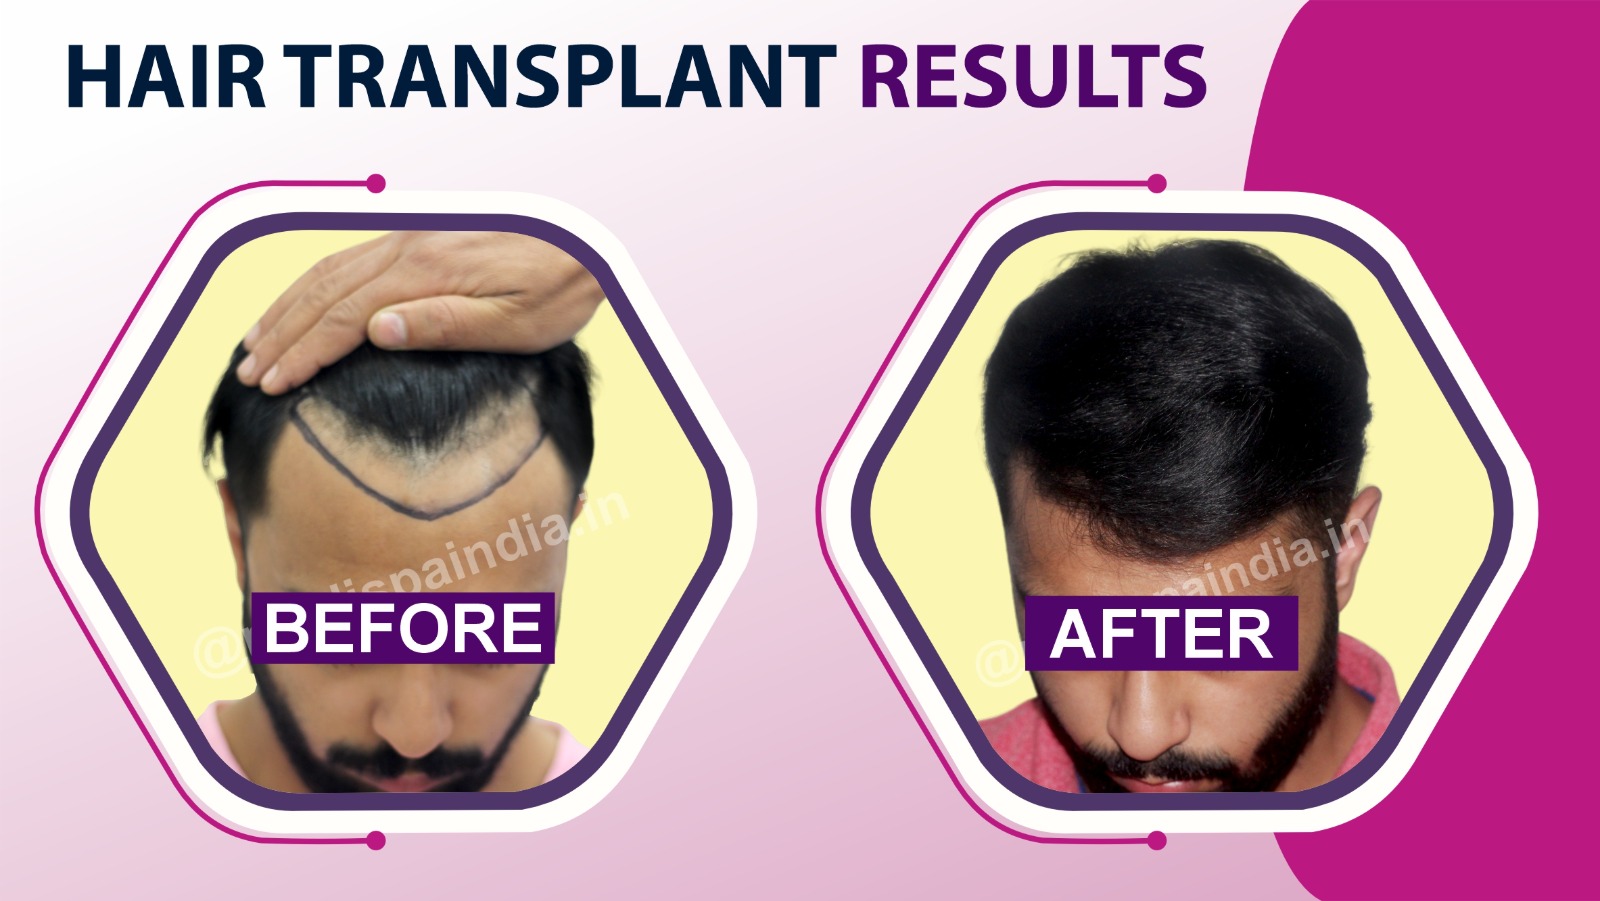 Is Hair Transplant The Best Option To Stop Receding Hairline?